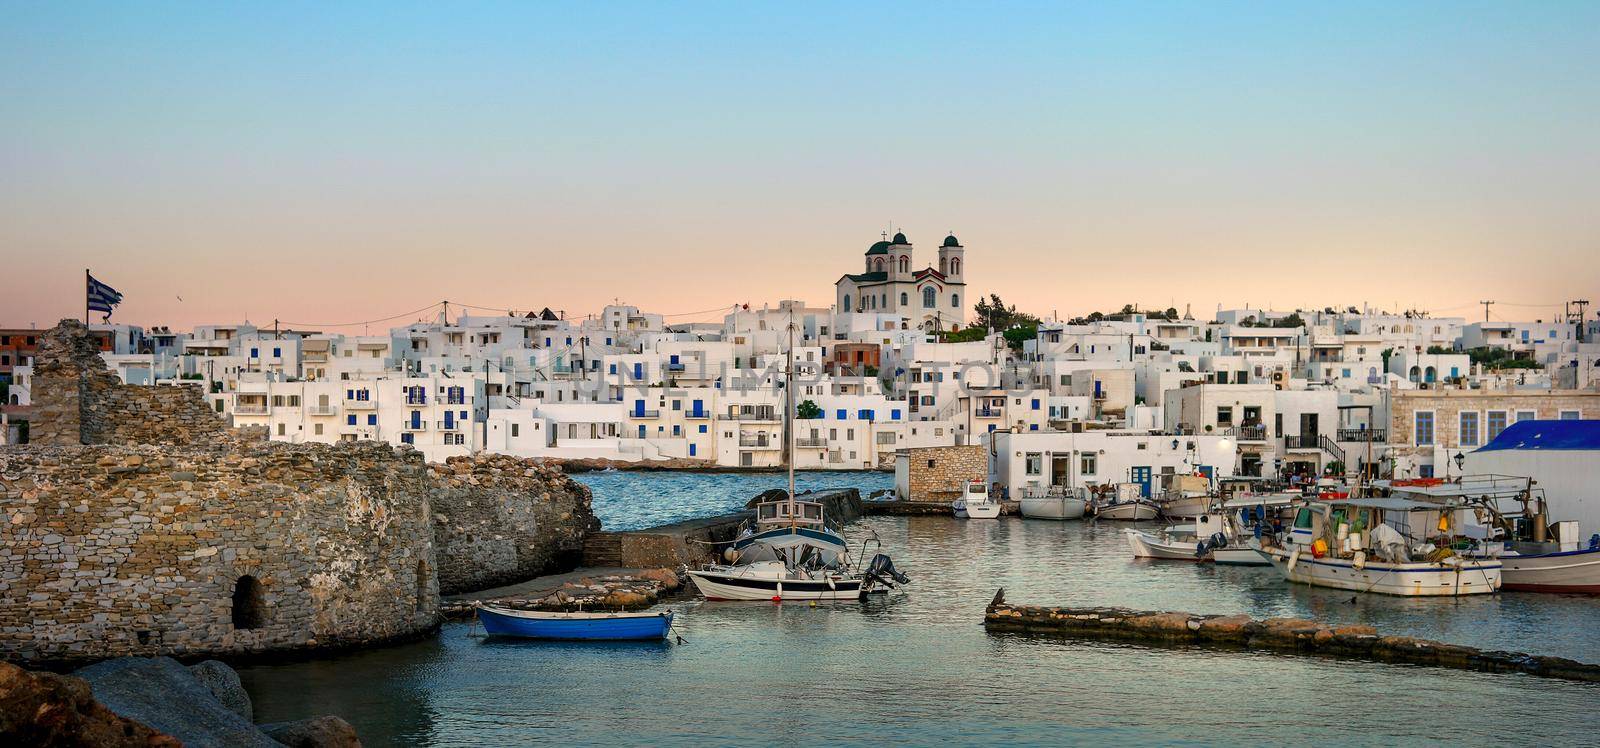 old port in the village on the island of Paros at sunset. Greece